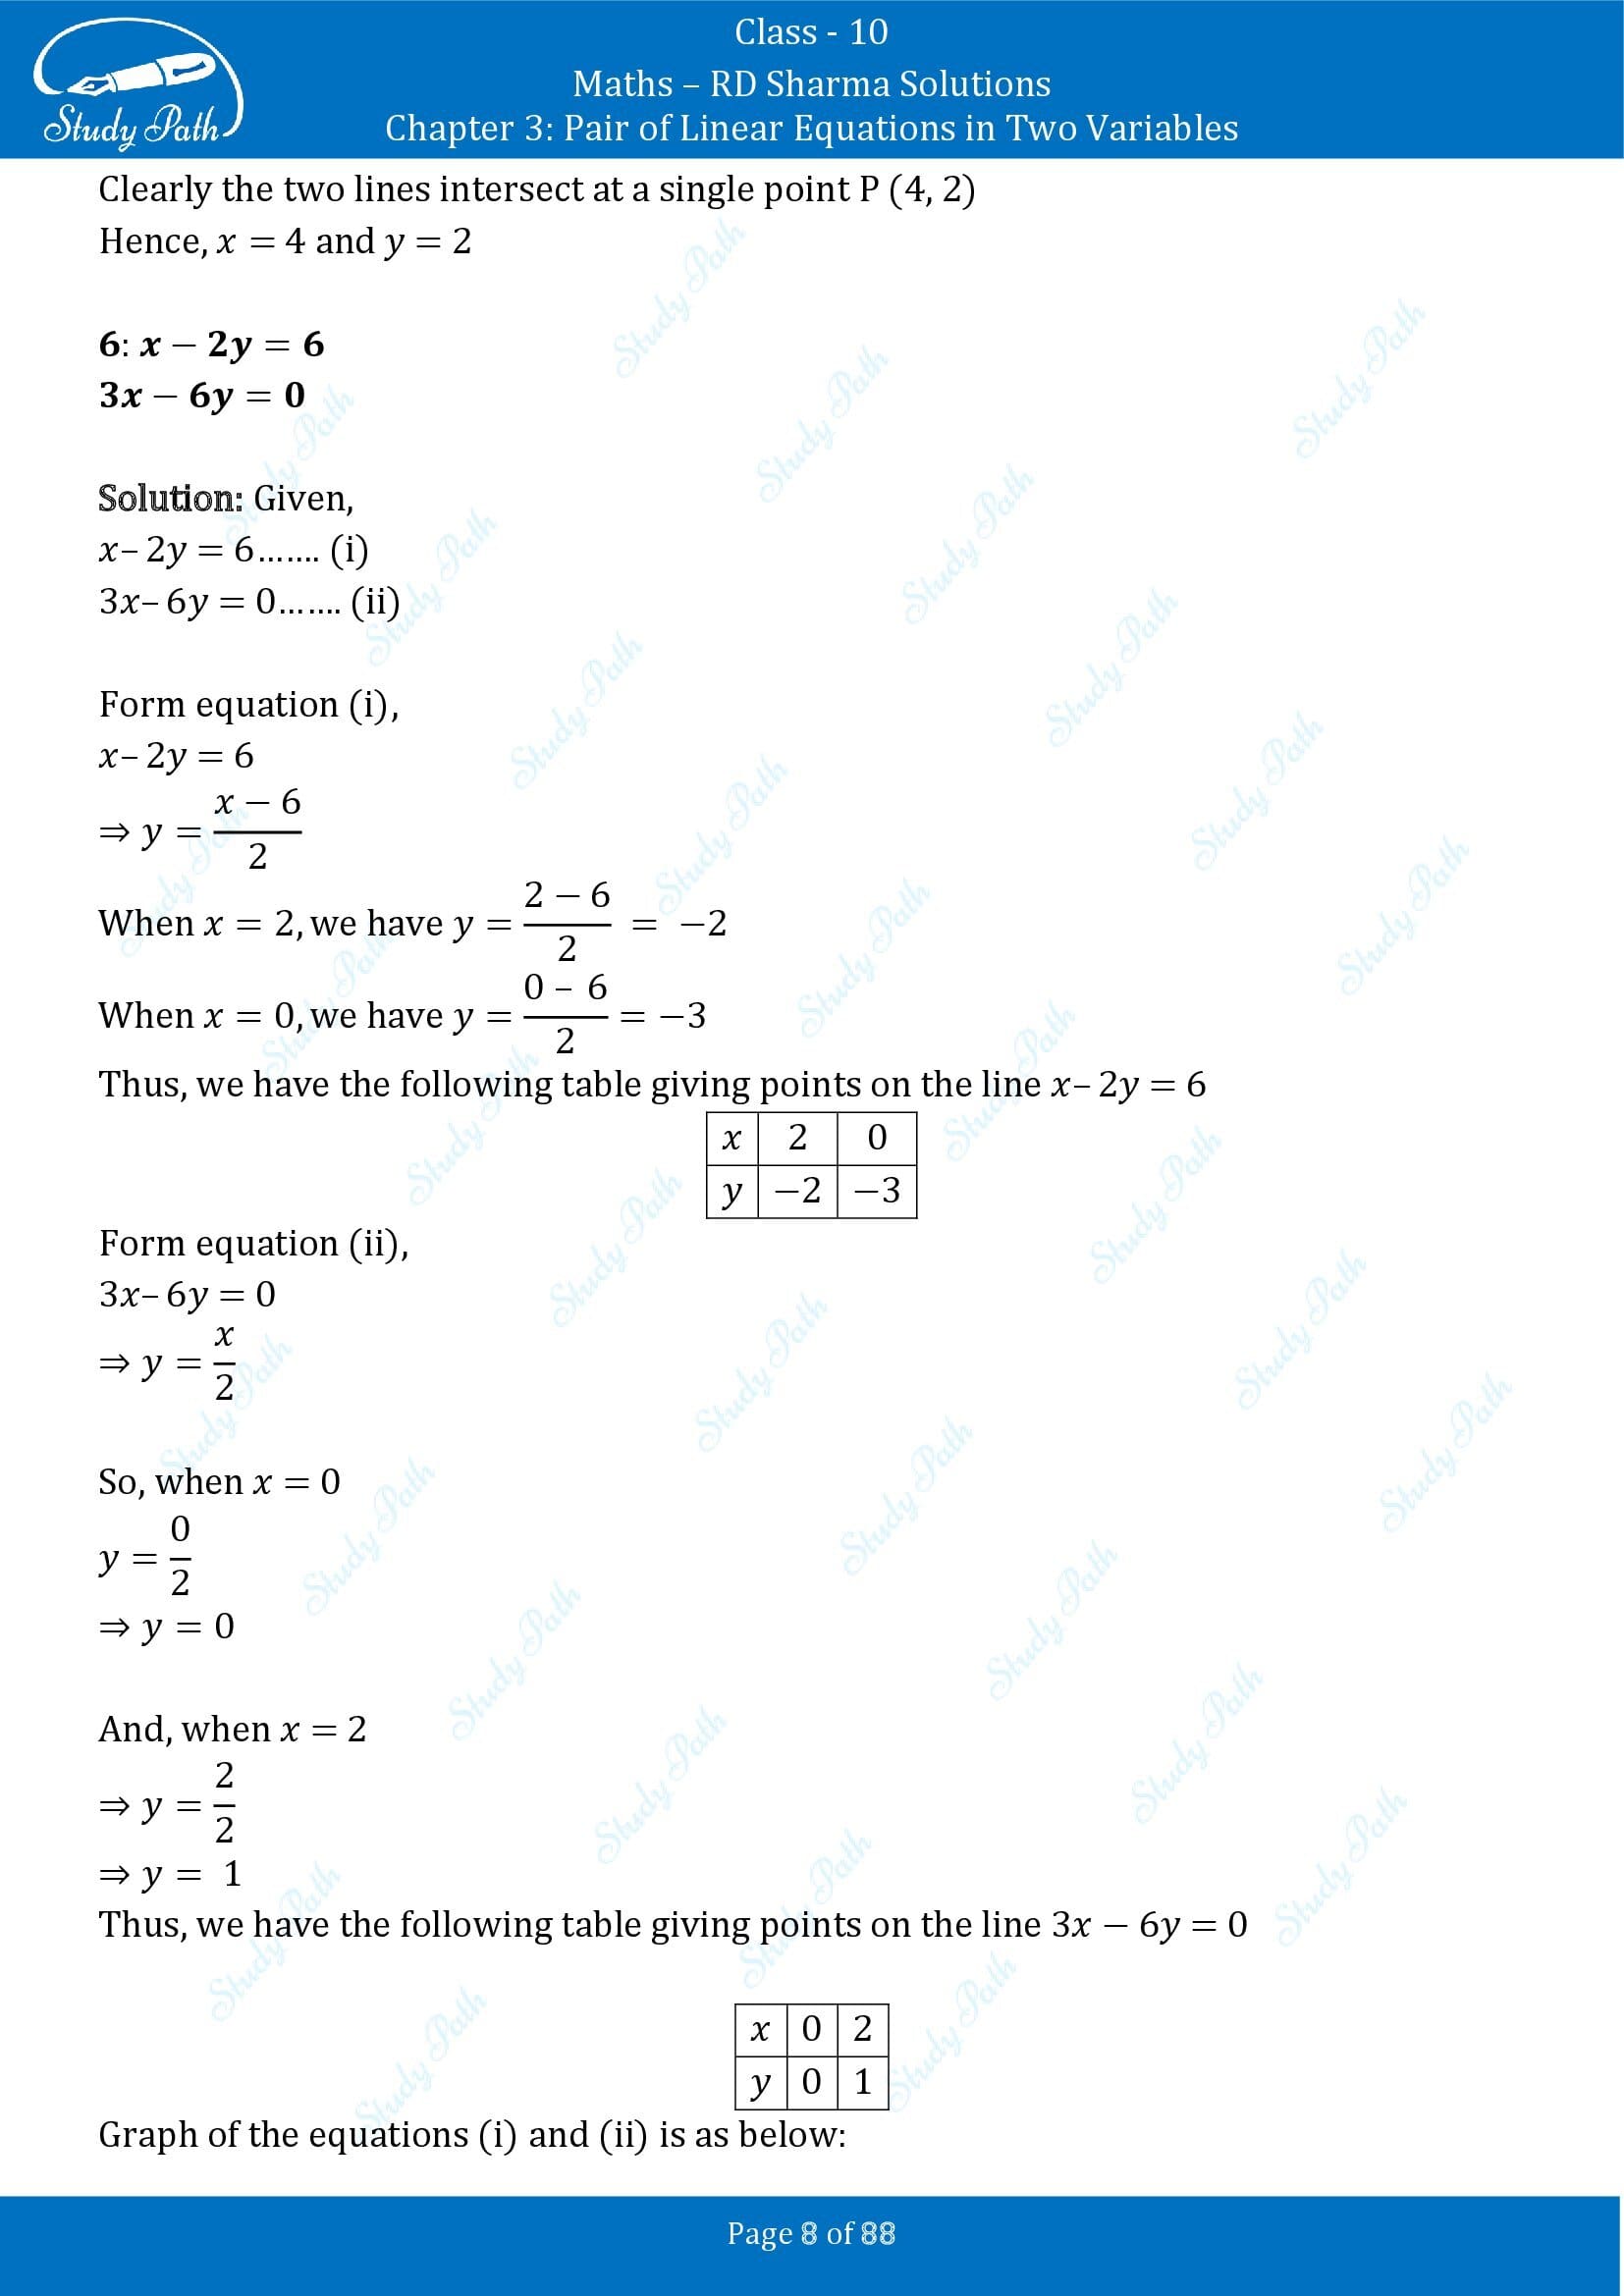 RD Sharma Solutions Class 10 Chapter 3 Pair of Linear Equations in Two Variables Exercise 3.2 00008